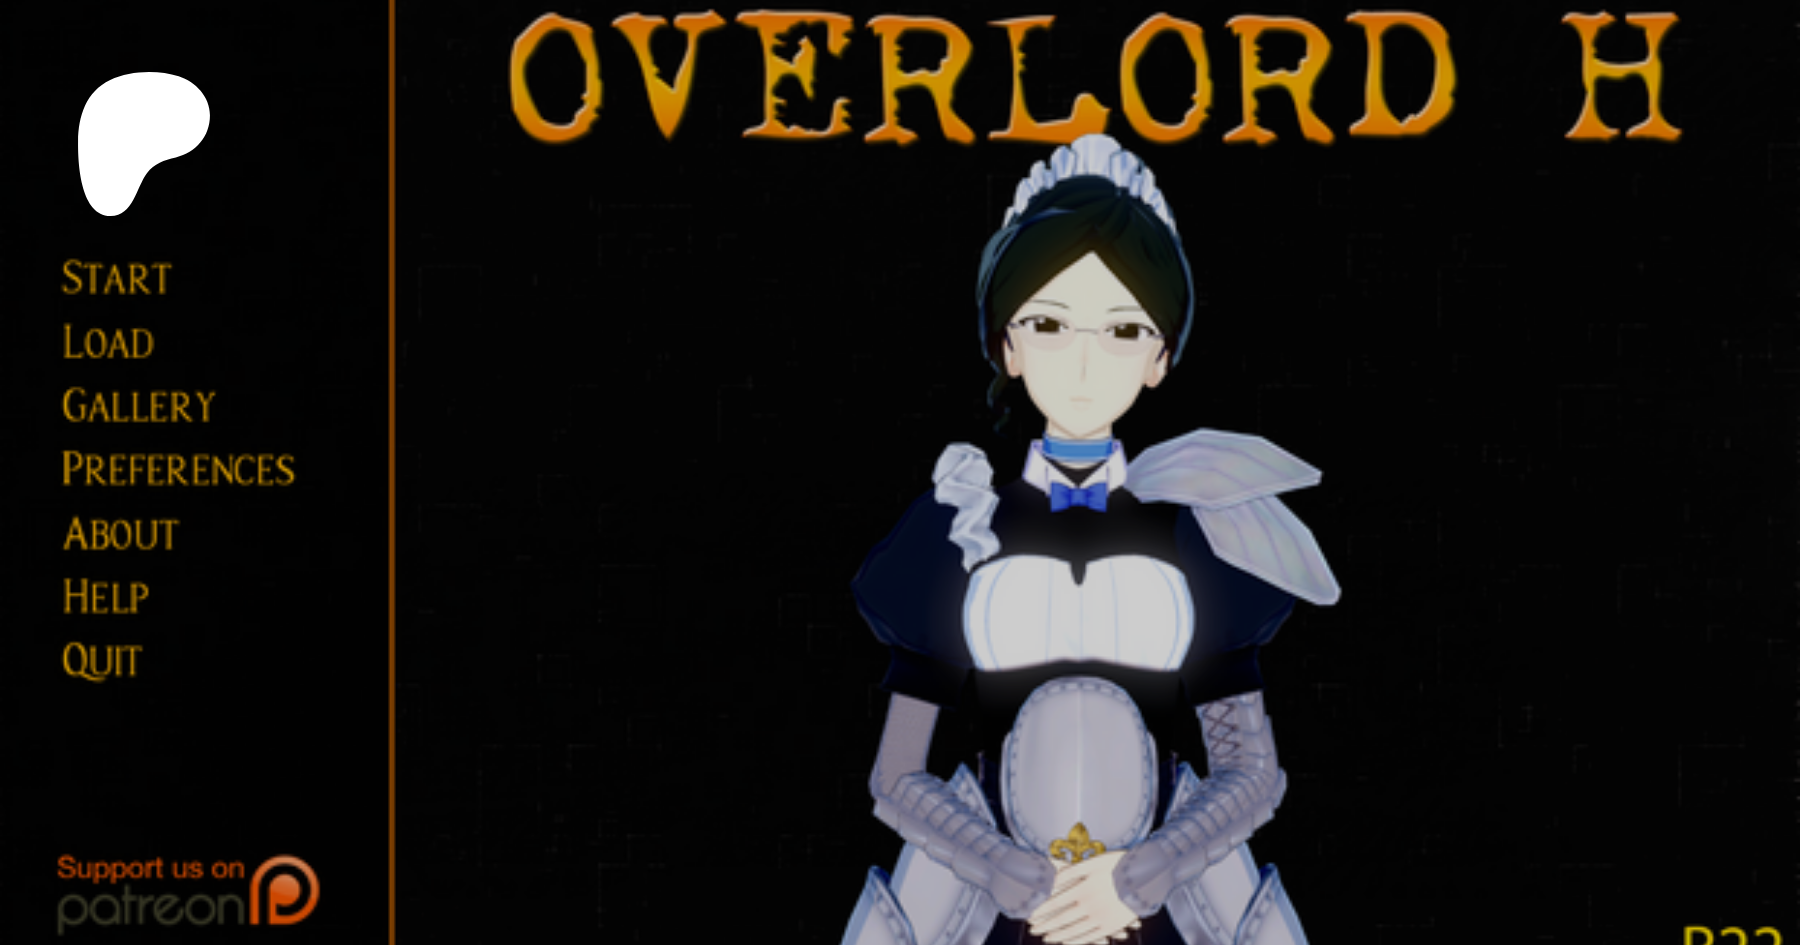 Overlord h